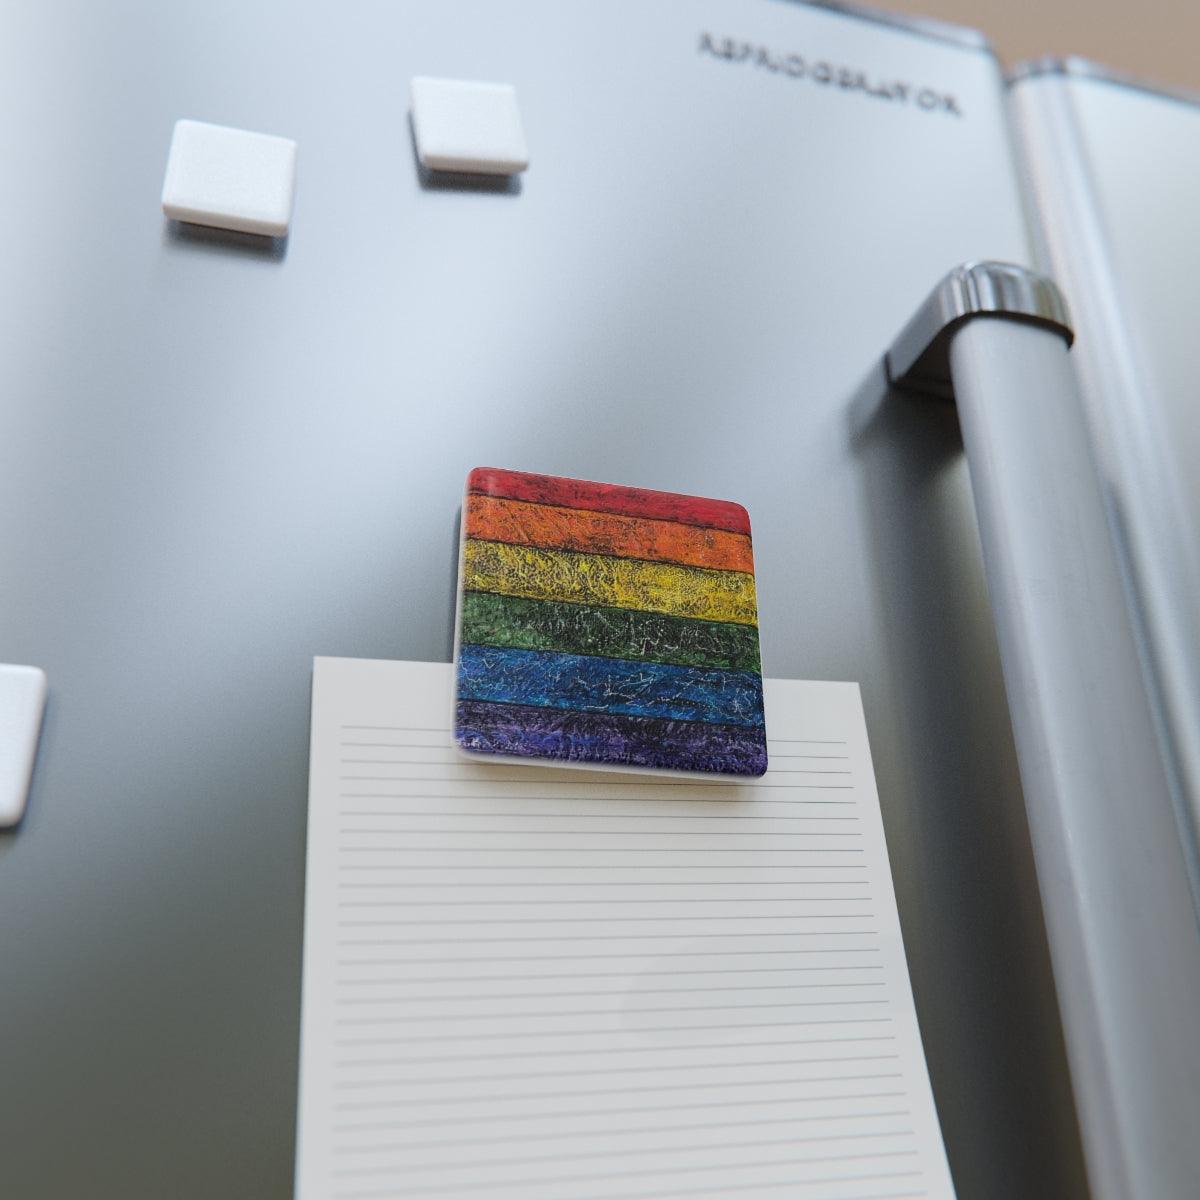 "Stonewall" Porcelain Magnet, Square-Home Decor - Mike Giannella - Encaustic Painting - Mixed Media Artist - Art Prints